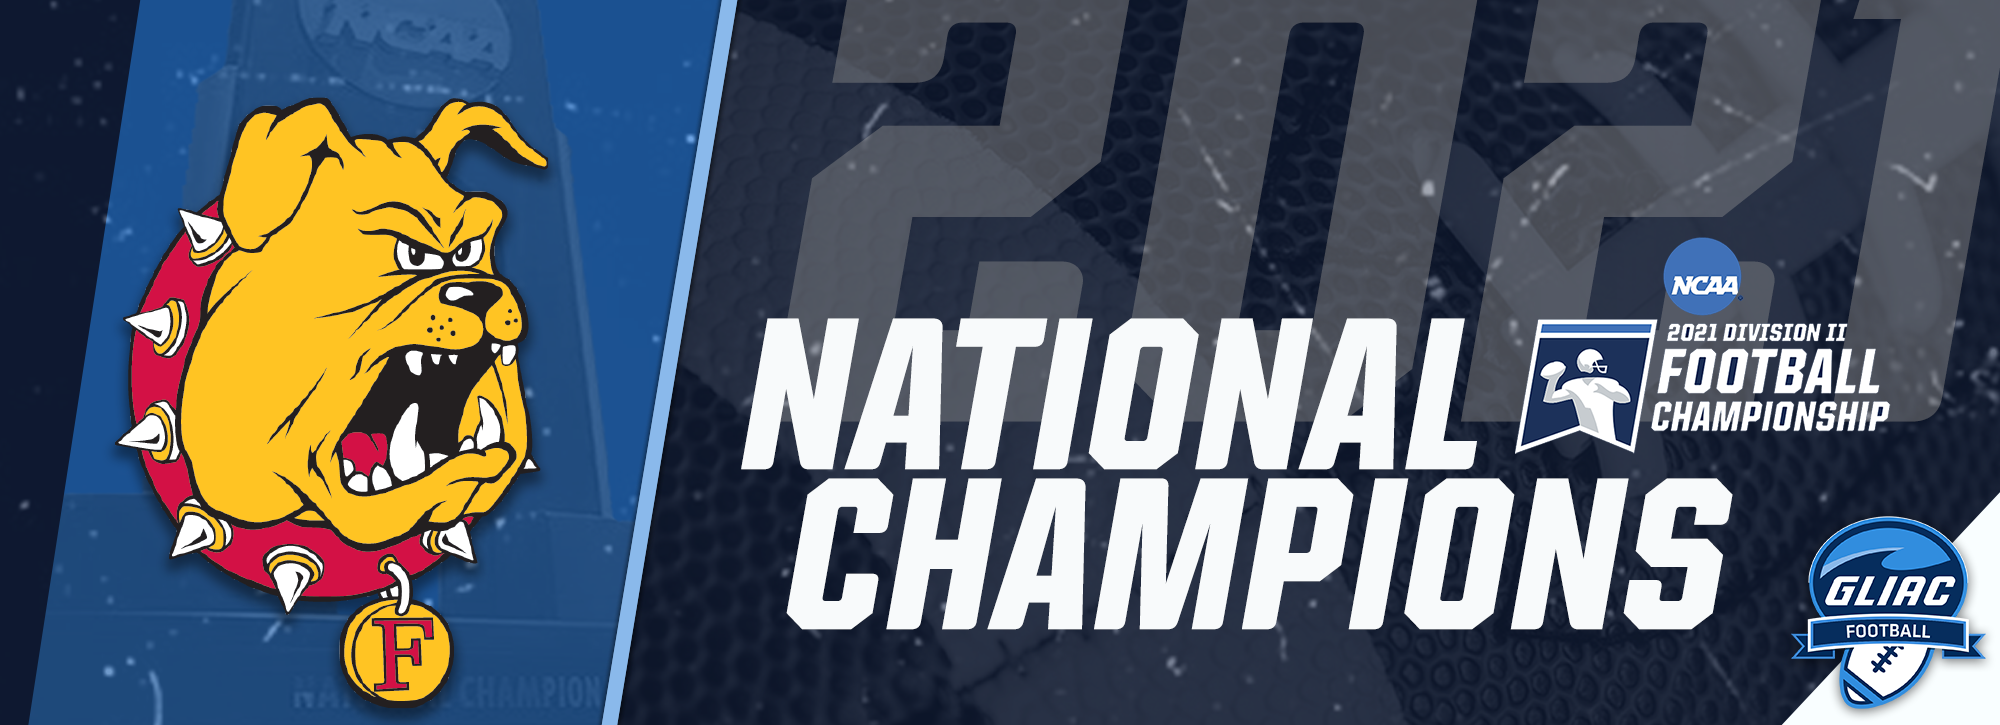 National Champions! Ferris State claims the 2021 NCAA Division II Football crown